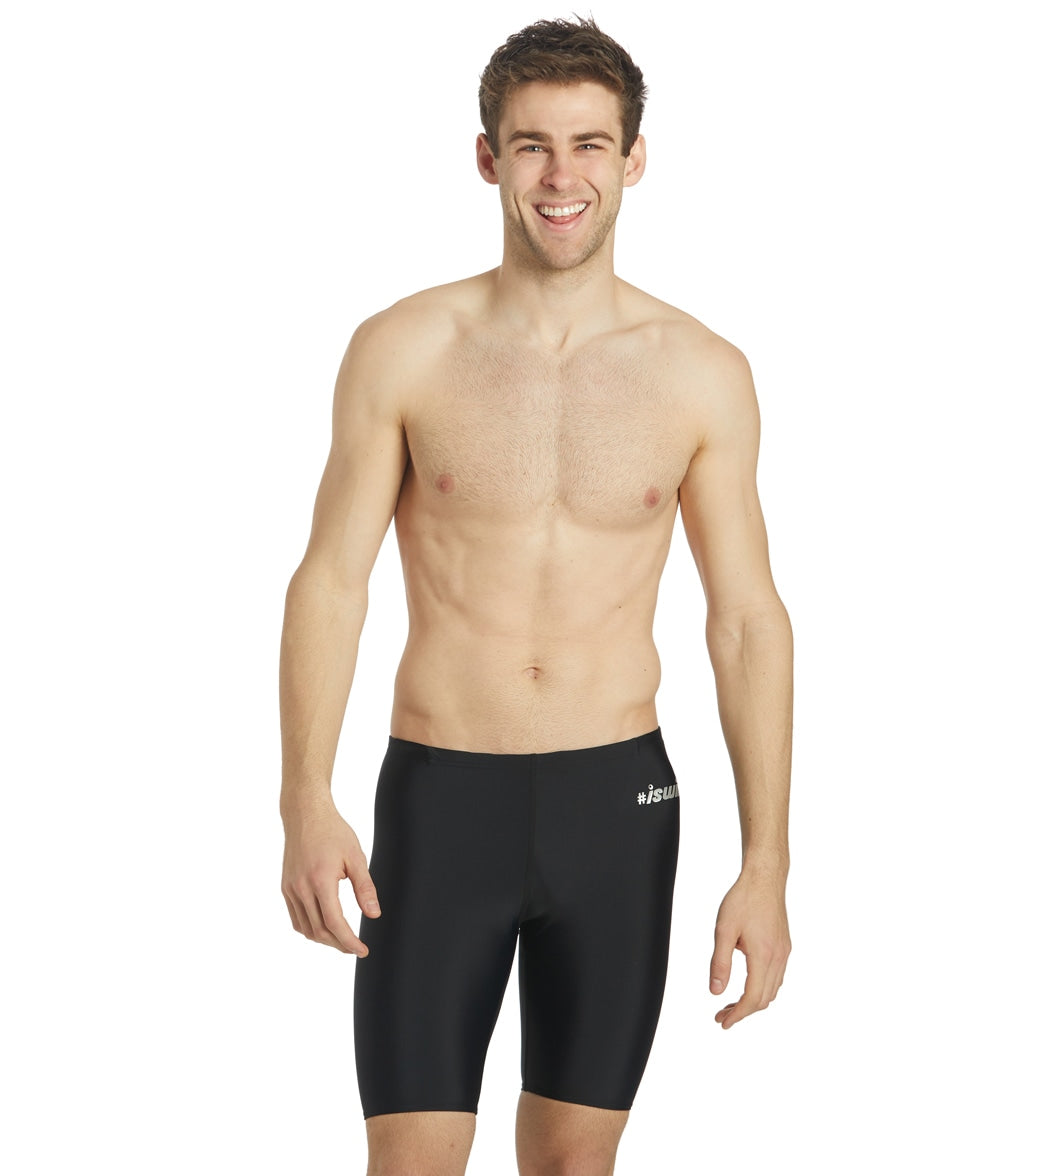 iSwim Men's Hashtag Jammer Swimsuit at SwimOutlet.com